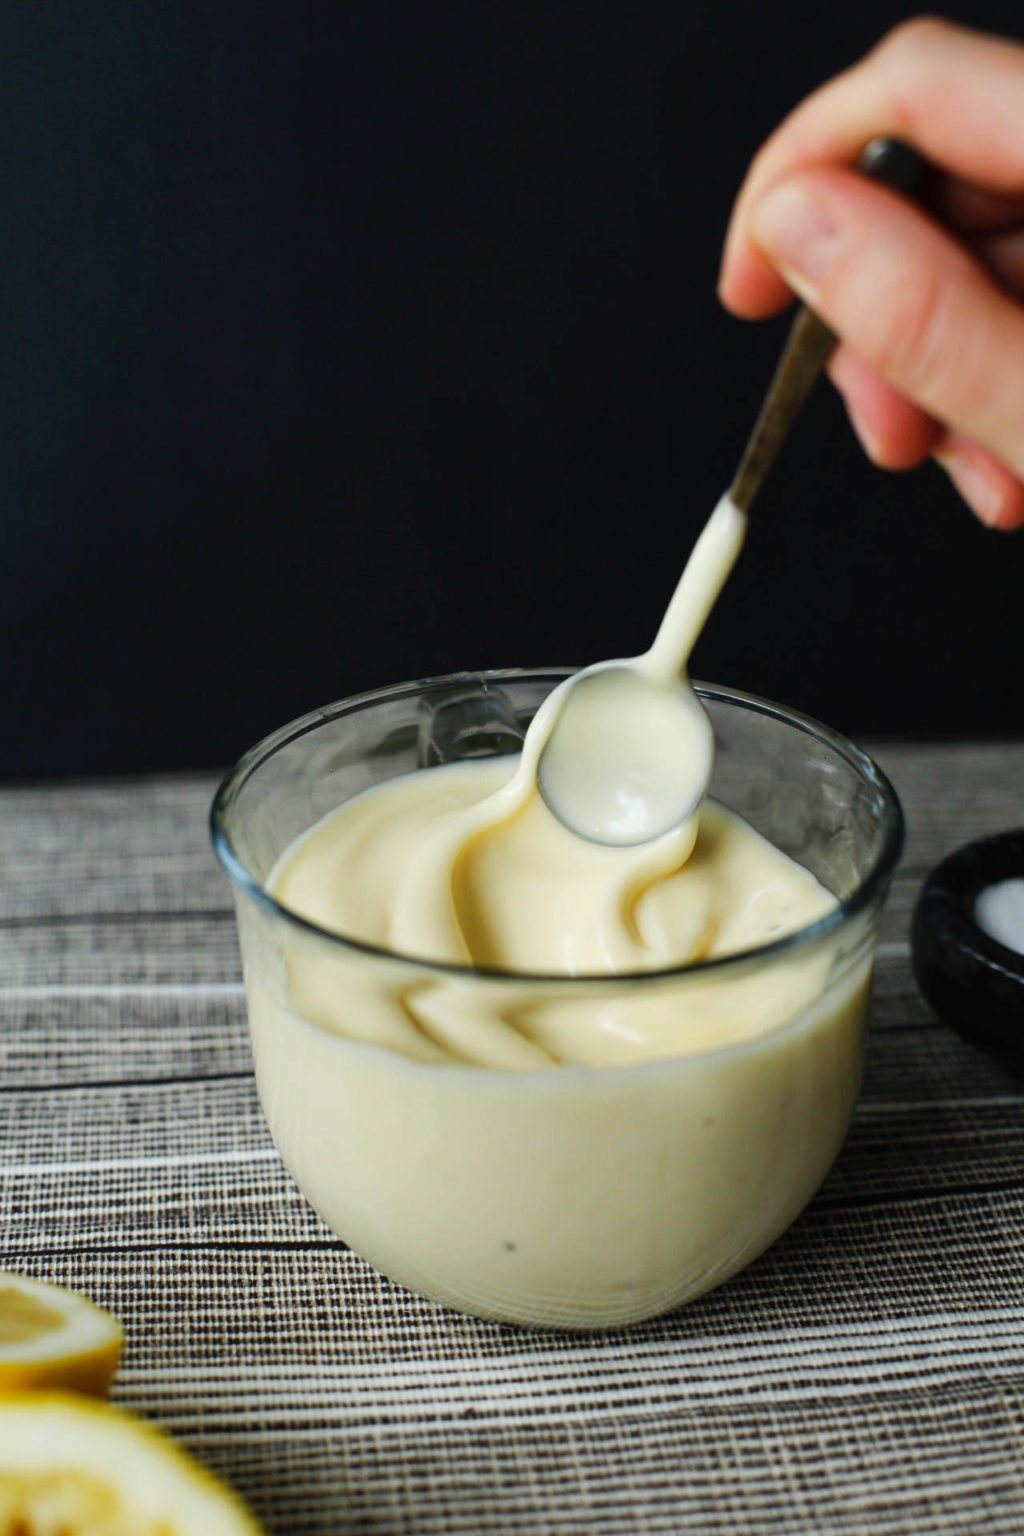 Easy Paleo Mayonnaise (4 ingredients!) – Love, Chef Laura